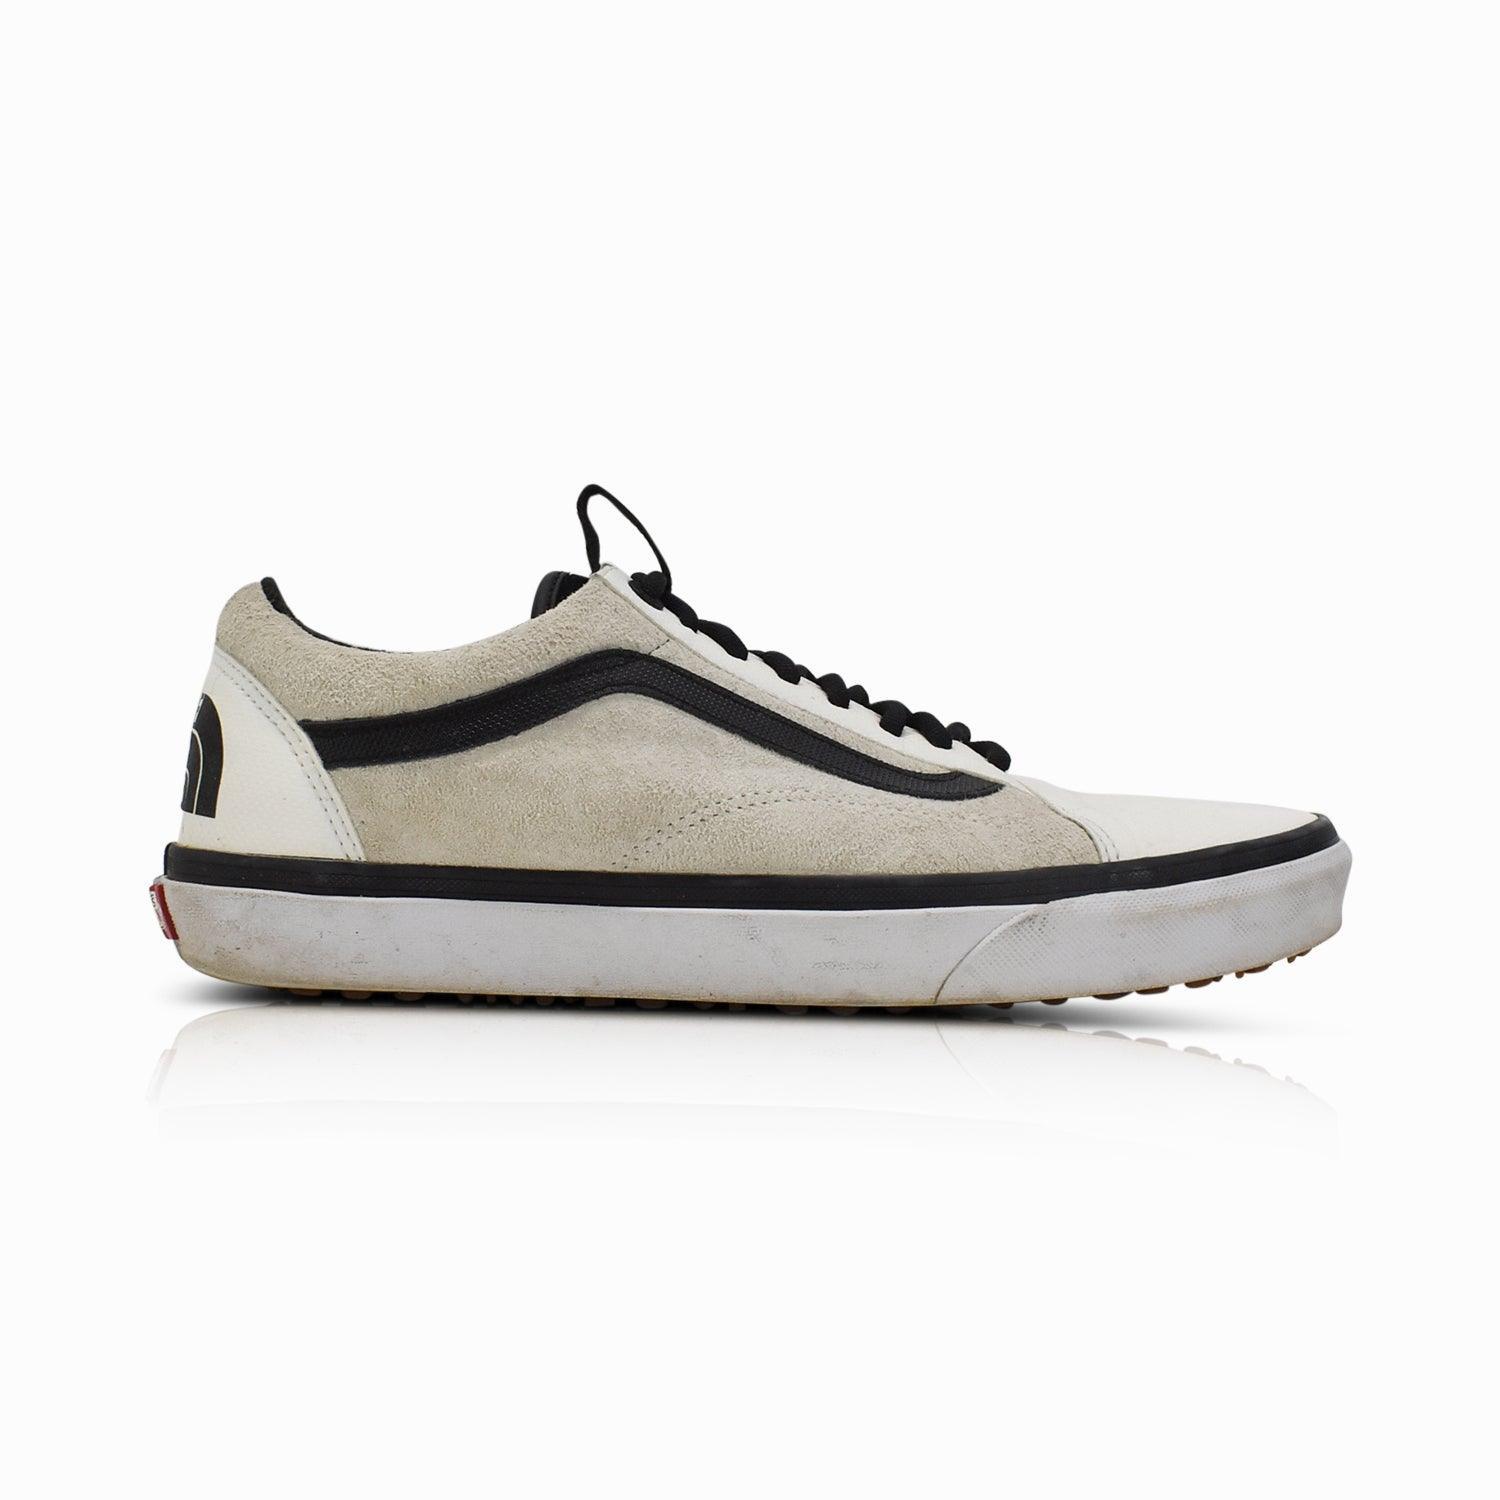 The North Face x Vans 'Old Skool' Sneaker - Men's 12 - Fashionably Yours